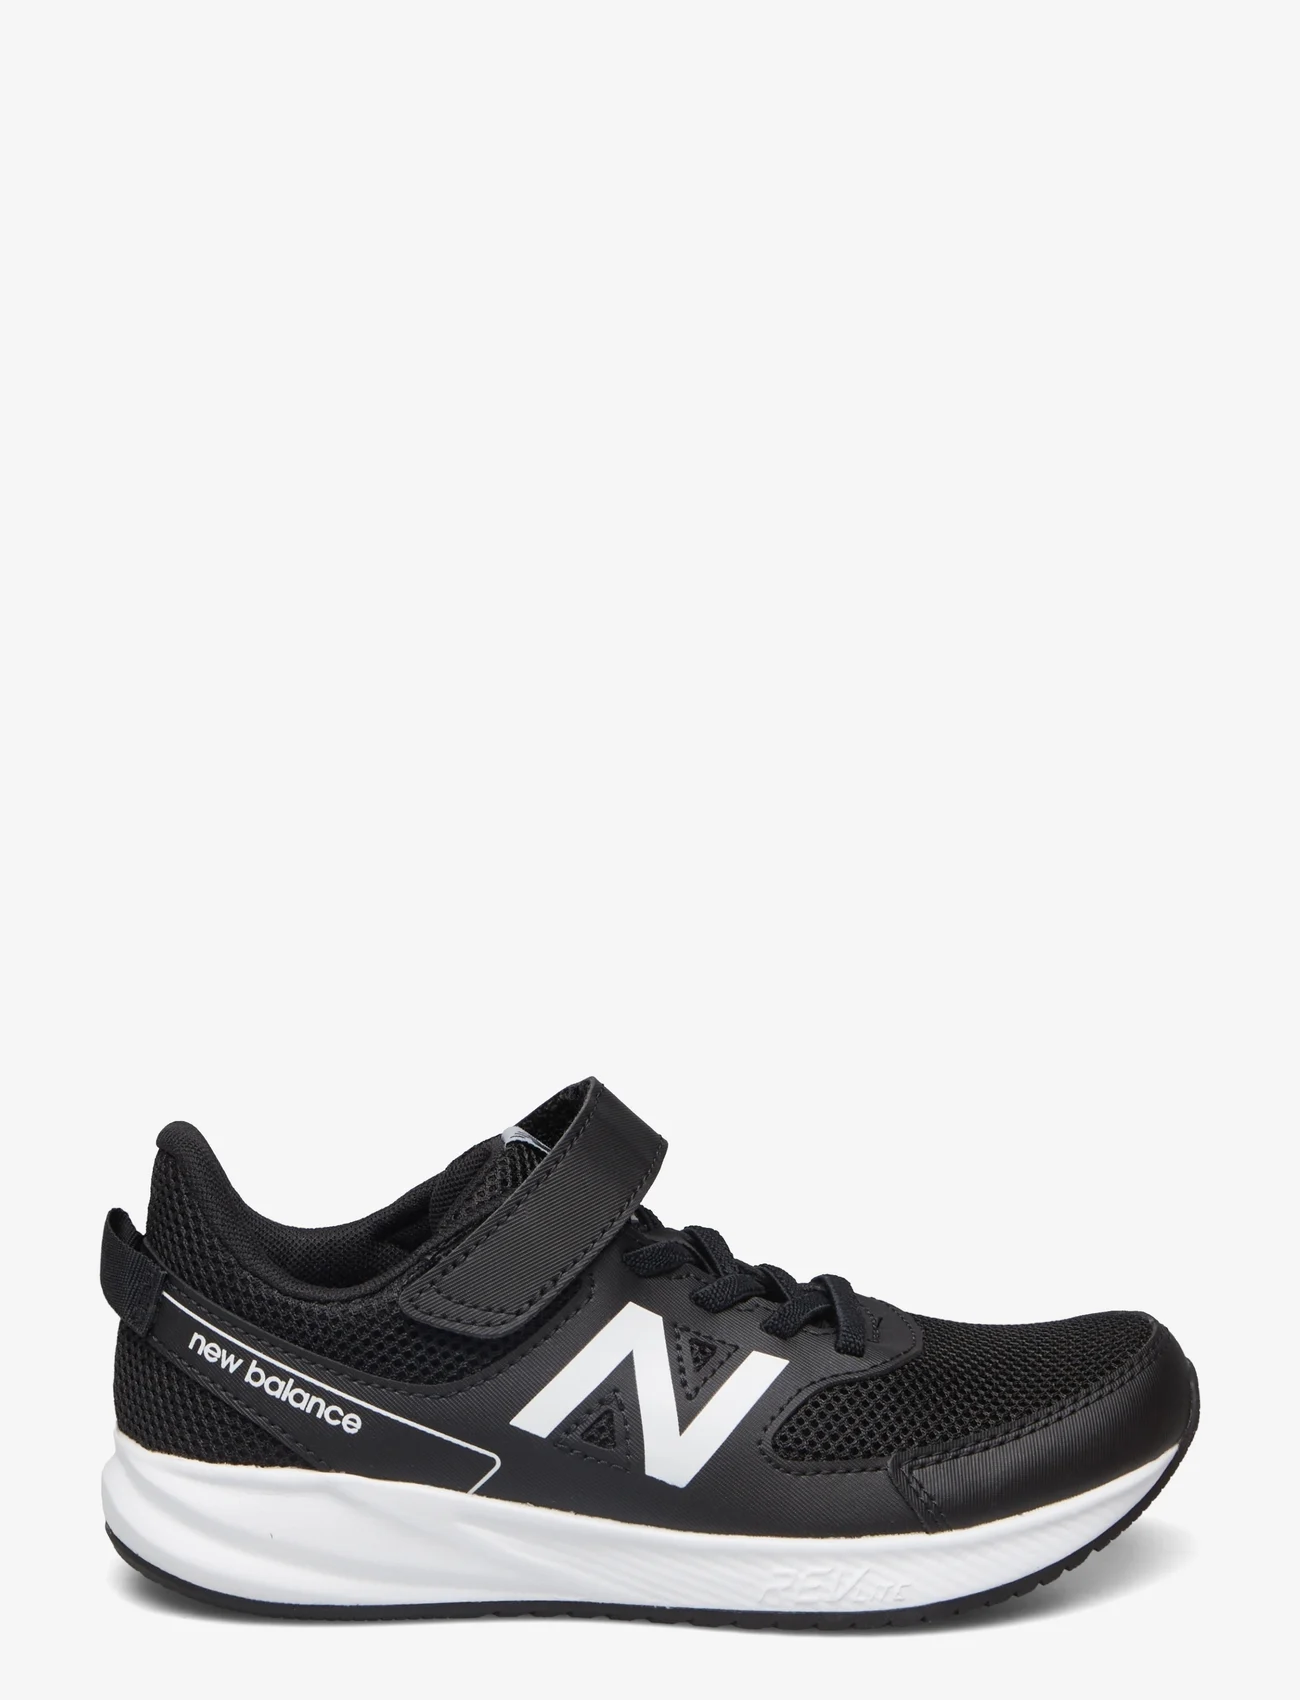 New Balance - New Balance 570 v3 Kids Bungee Lace with Hook & Loop Top Strap - buty do biegania - black - 1